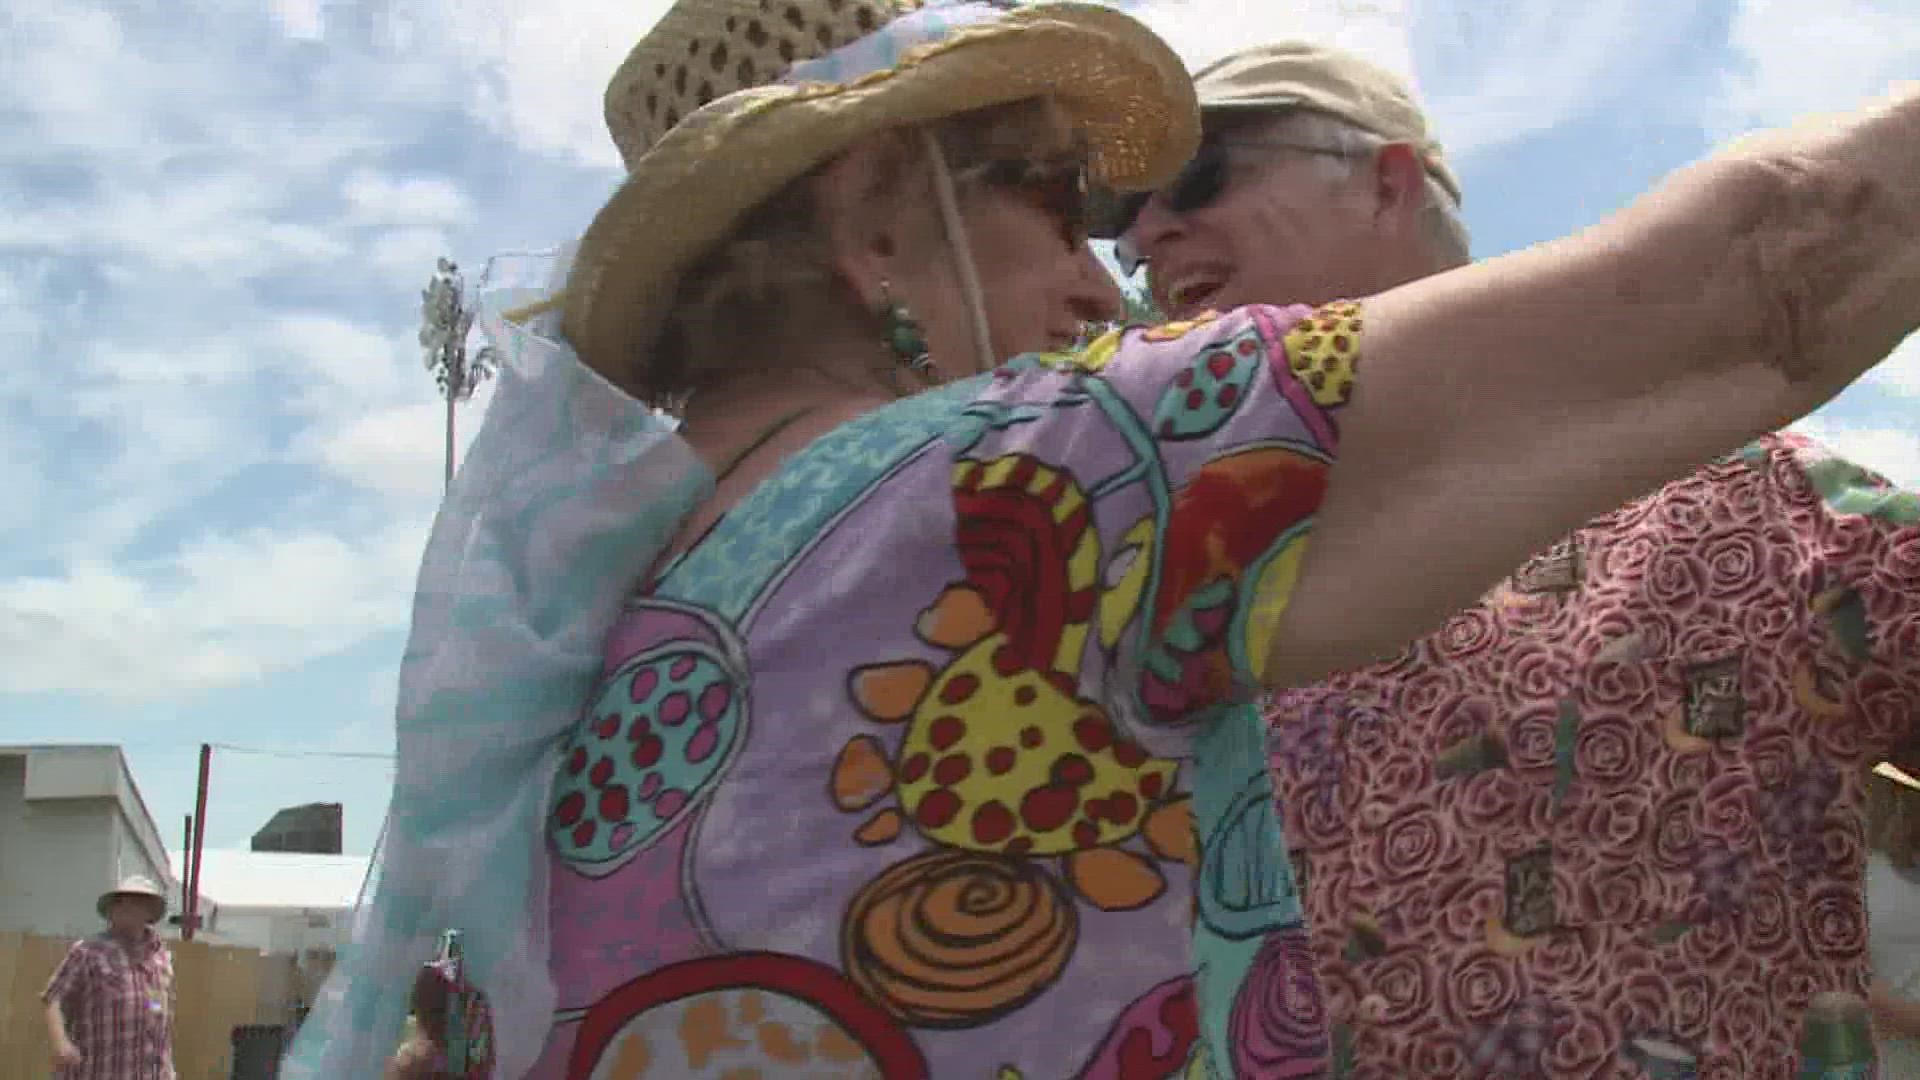 People burst through the gates of the fair grounds Friday afternoon to return to the festival.